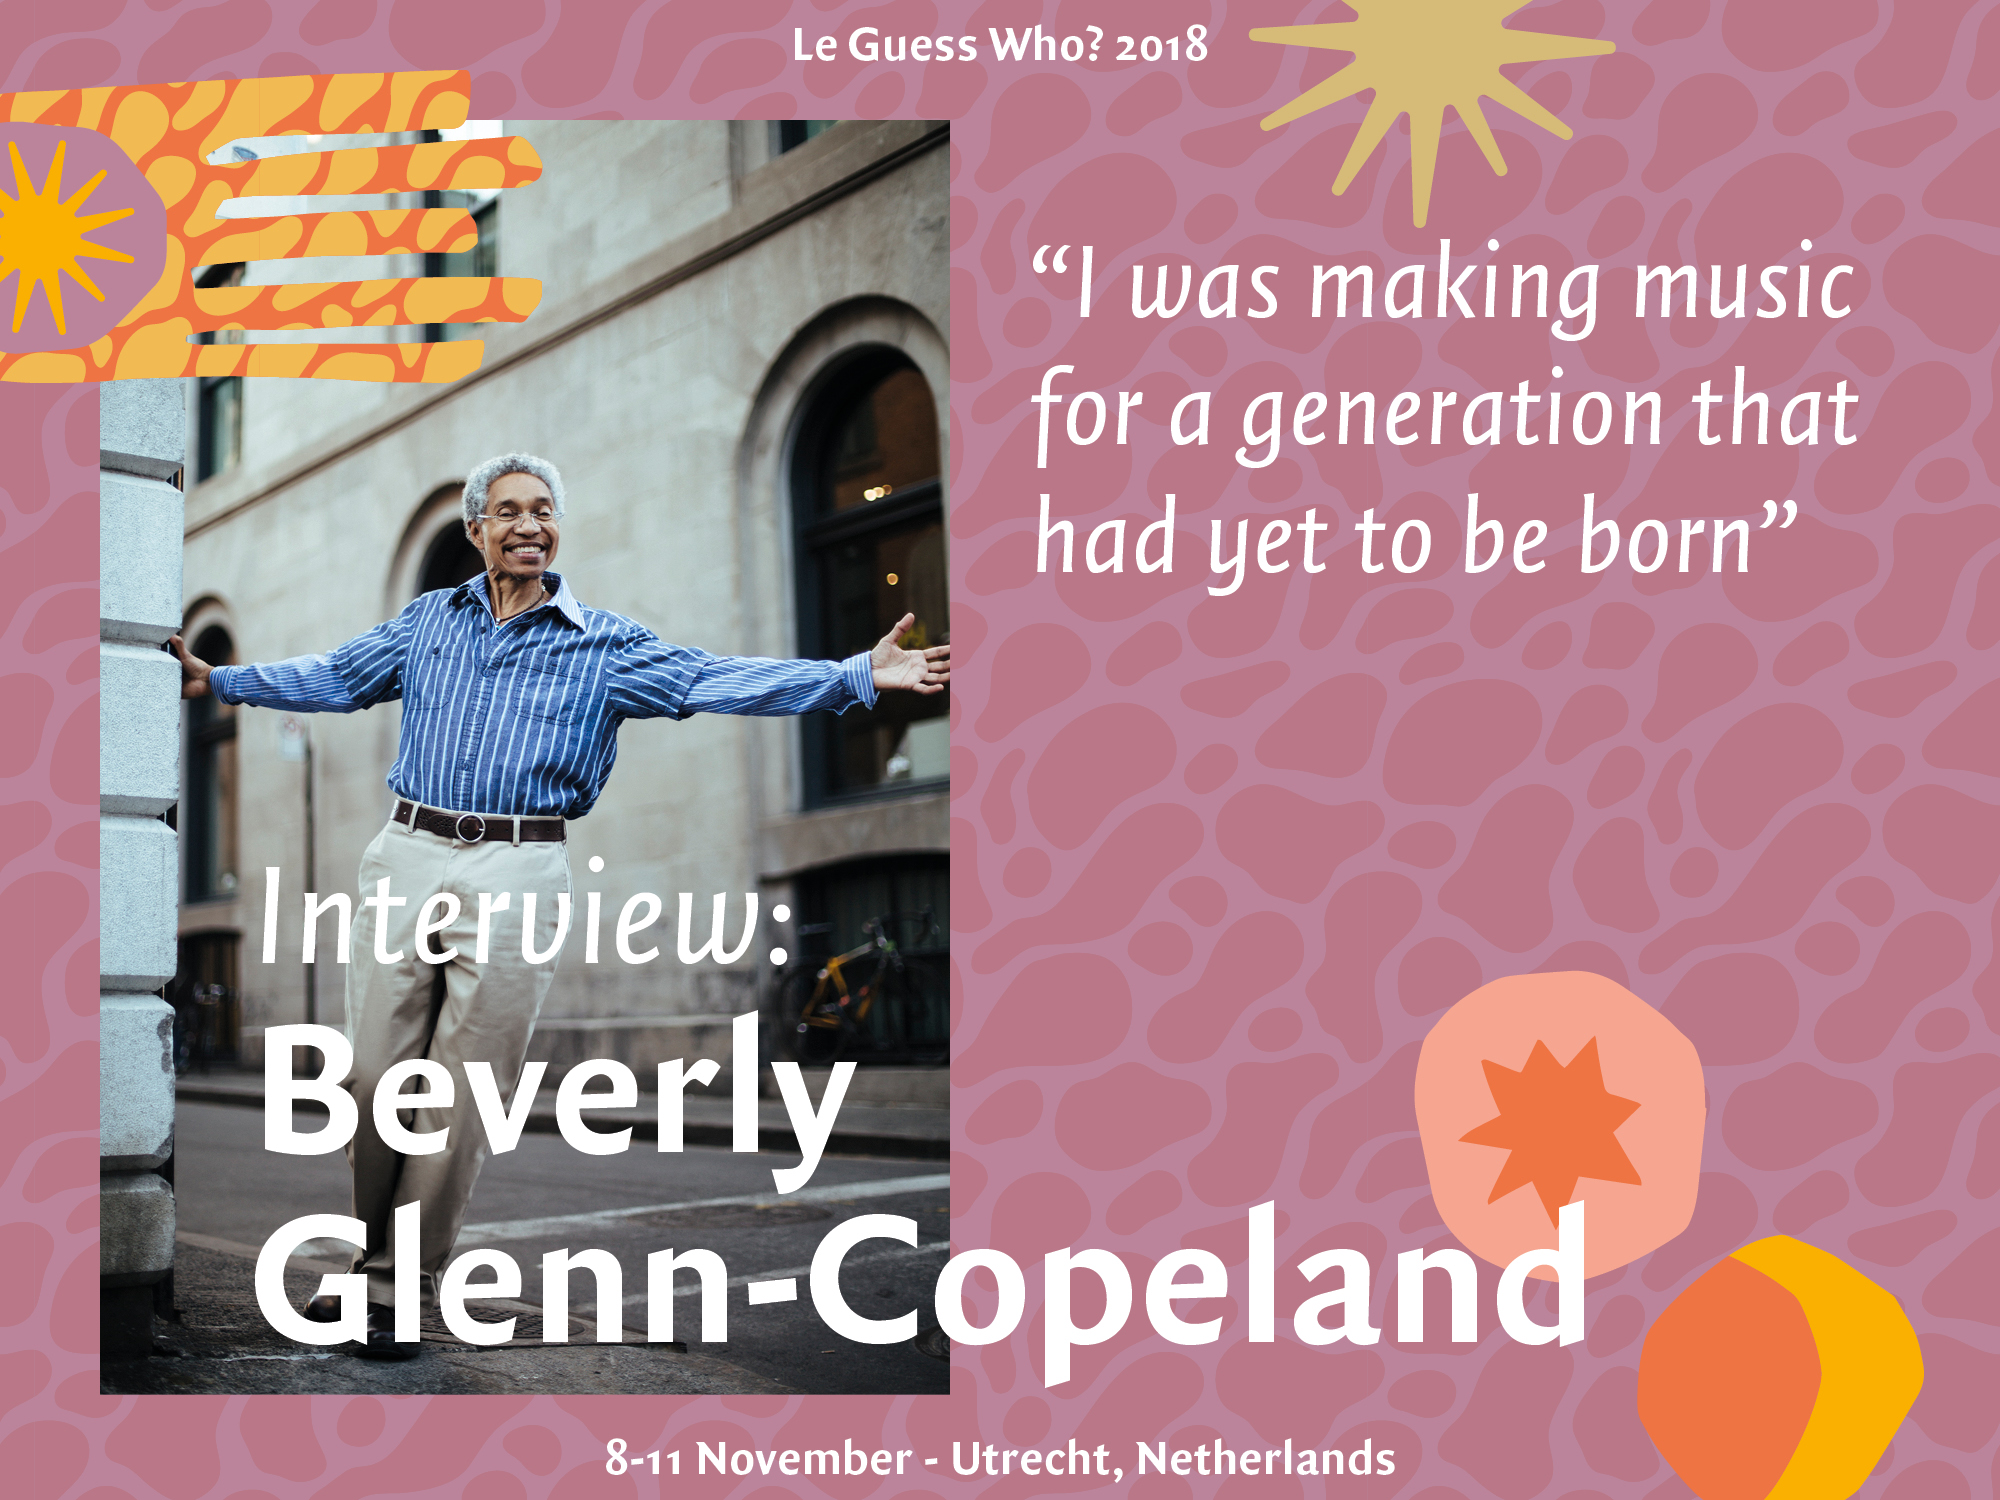 Beverly Glenn-Copeland: “I was making music for a generation that had yet to be born”